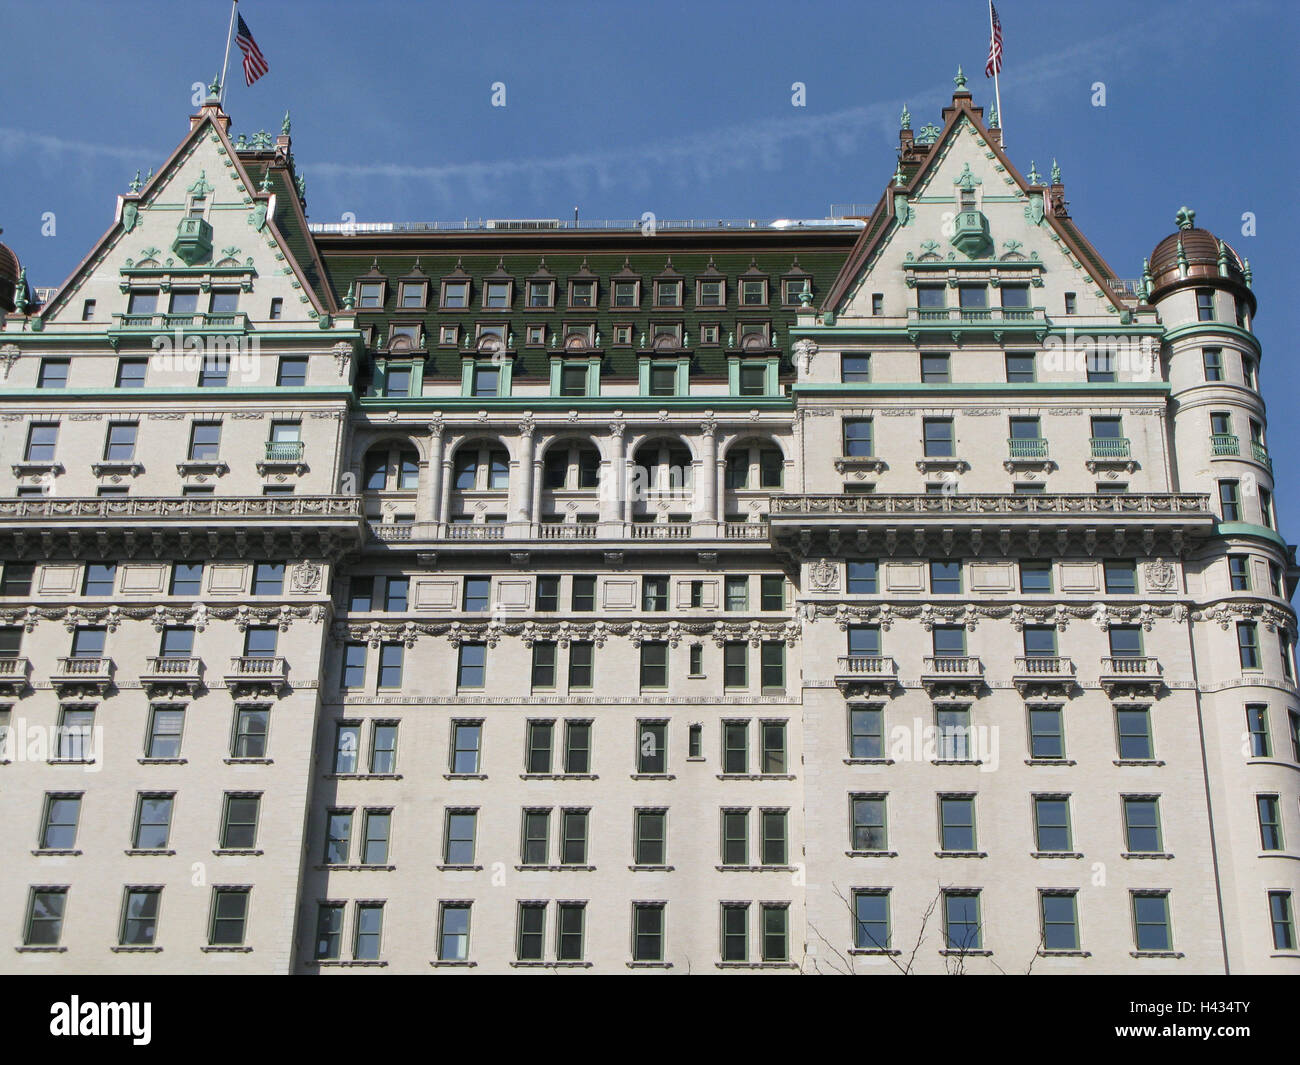 The USA, New York city, Manhattan, plaza Hotel, Facade, Detail, North America, town, destination, building, structure, hotel business, architecture, hotel building, five-star hotel, luxury, high-class hotel, nobly, steeped in tradition, outside, Stock Photo